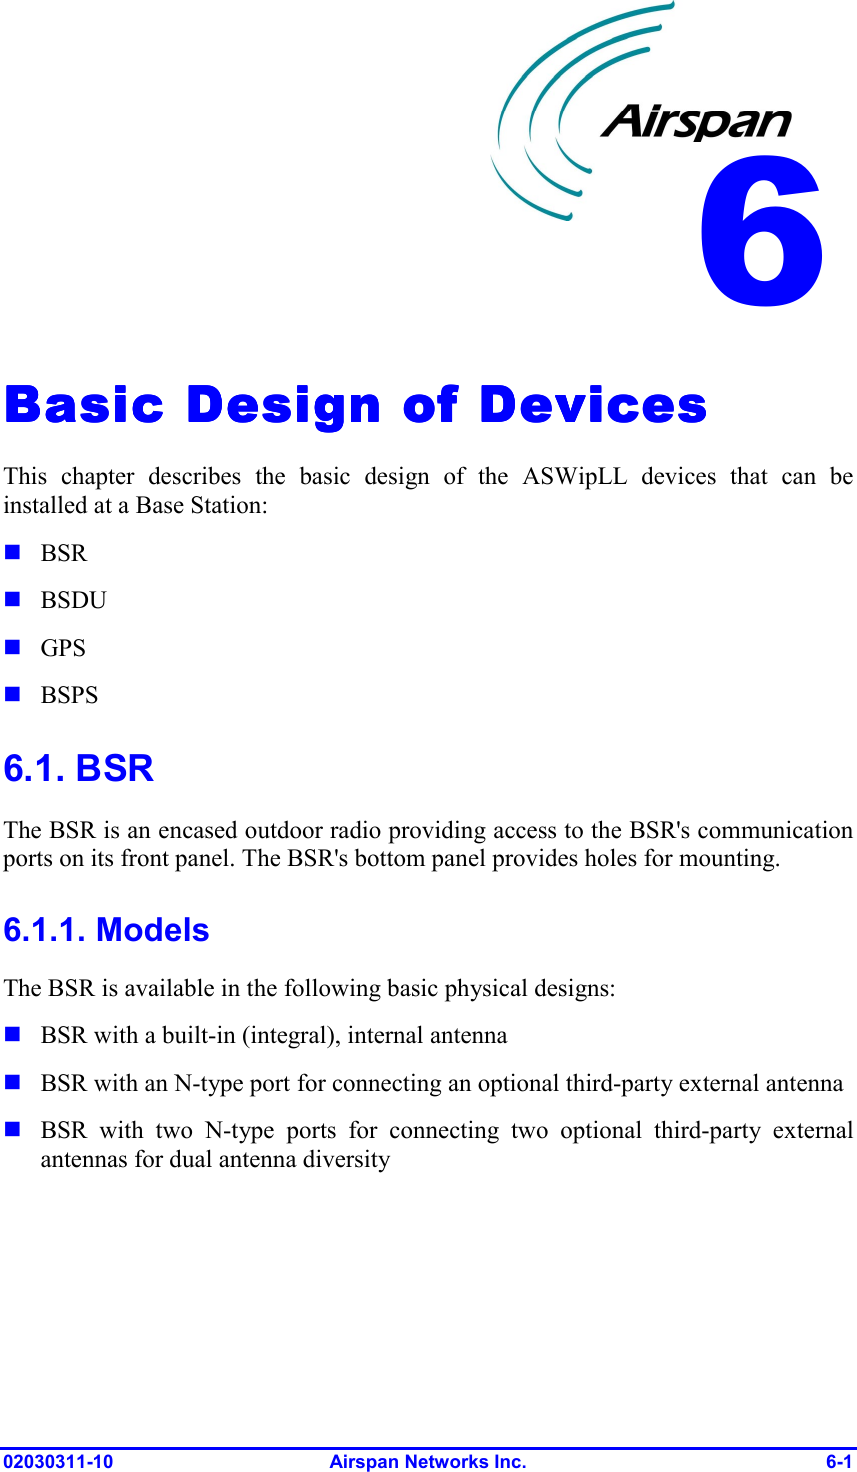  02030311-10 Airspan Networks Inc.  6-1 Basic Design of DevicesBasic Design of DevicesBasic Design of DevicesBasic Design of Devices    This chapter describes the basic design of the ASWipLL devices that can be installed at a Base Station:  BSR  BSDU  GPS  BSPS 6.1. BSR The BSR is an encased outdoor radio providing access to the BSR&apos;s communication ports on its front panel. The BSR&apos;s bottom panel provides holes for mounting. 6.1.1. Models The BSR is available in the following basic physical designs:   BSR with a built-in (integral), internal antenna  BSR with an N-type port for connecting an optional third-party external antenna  BSR with two N-type ports for connecting two optional third-party external antennas for dual antenna diversity 6 